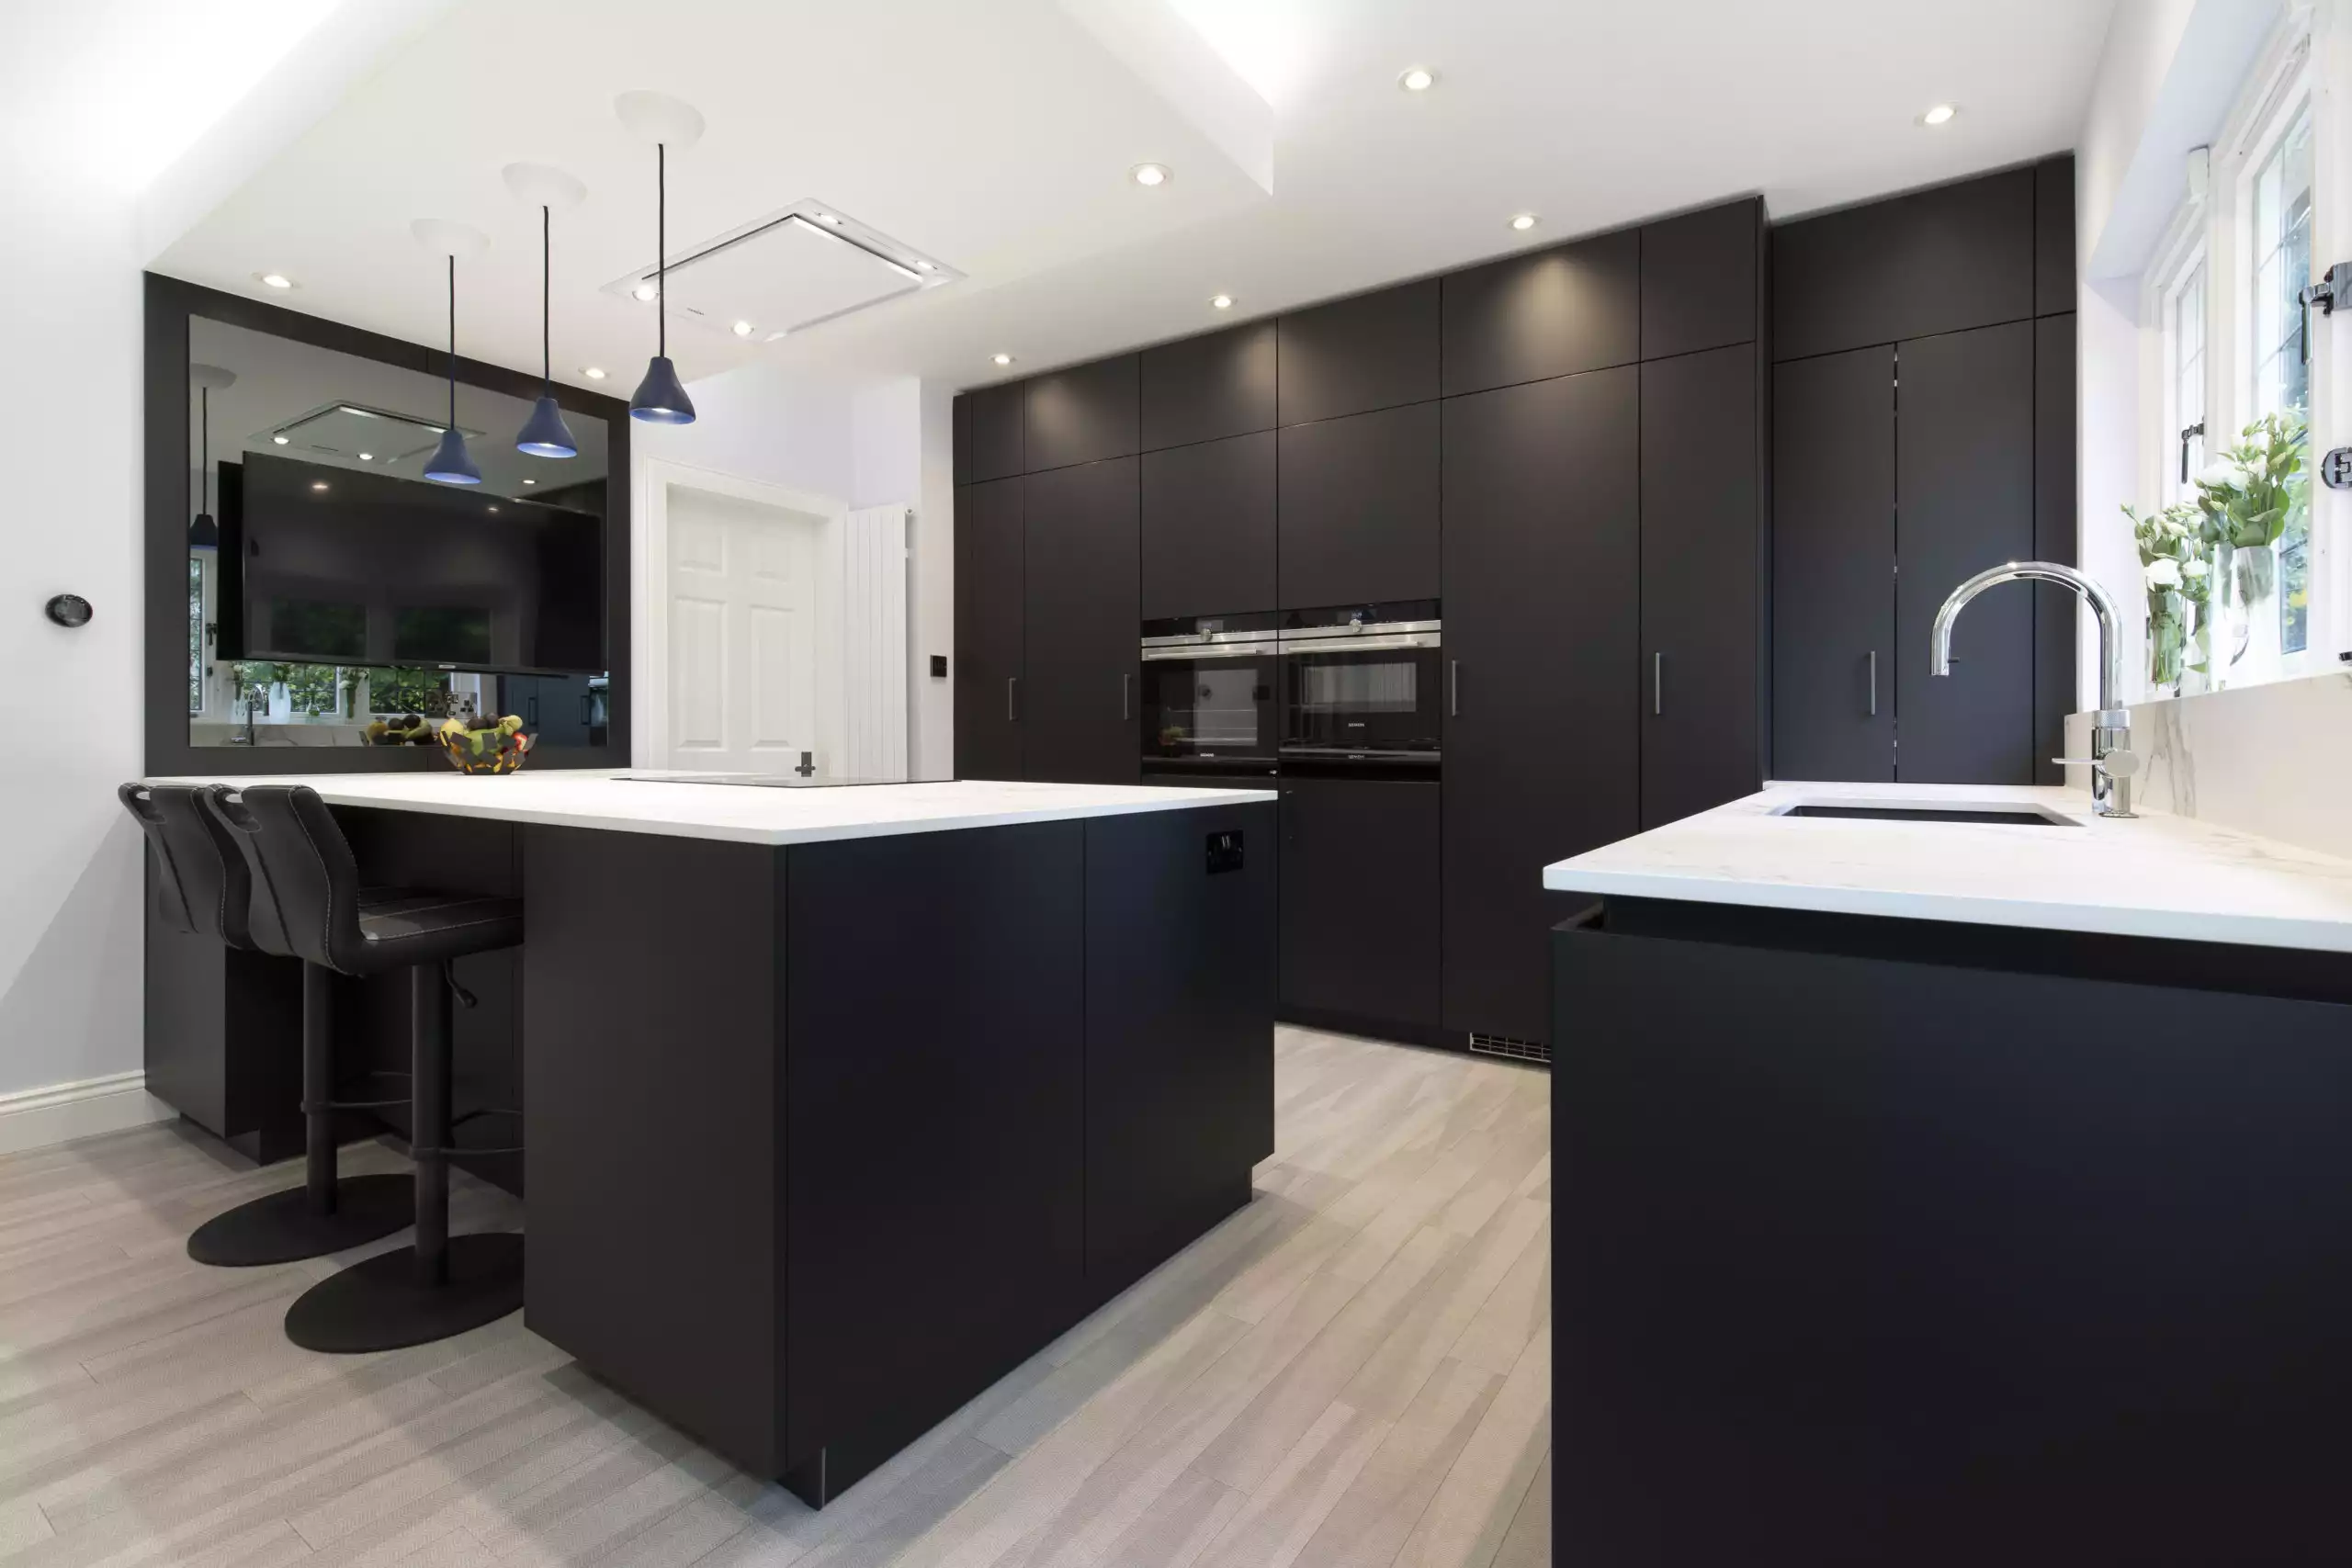 A modern kitchen with white countertops and black cupboards and walls